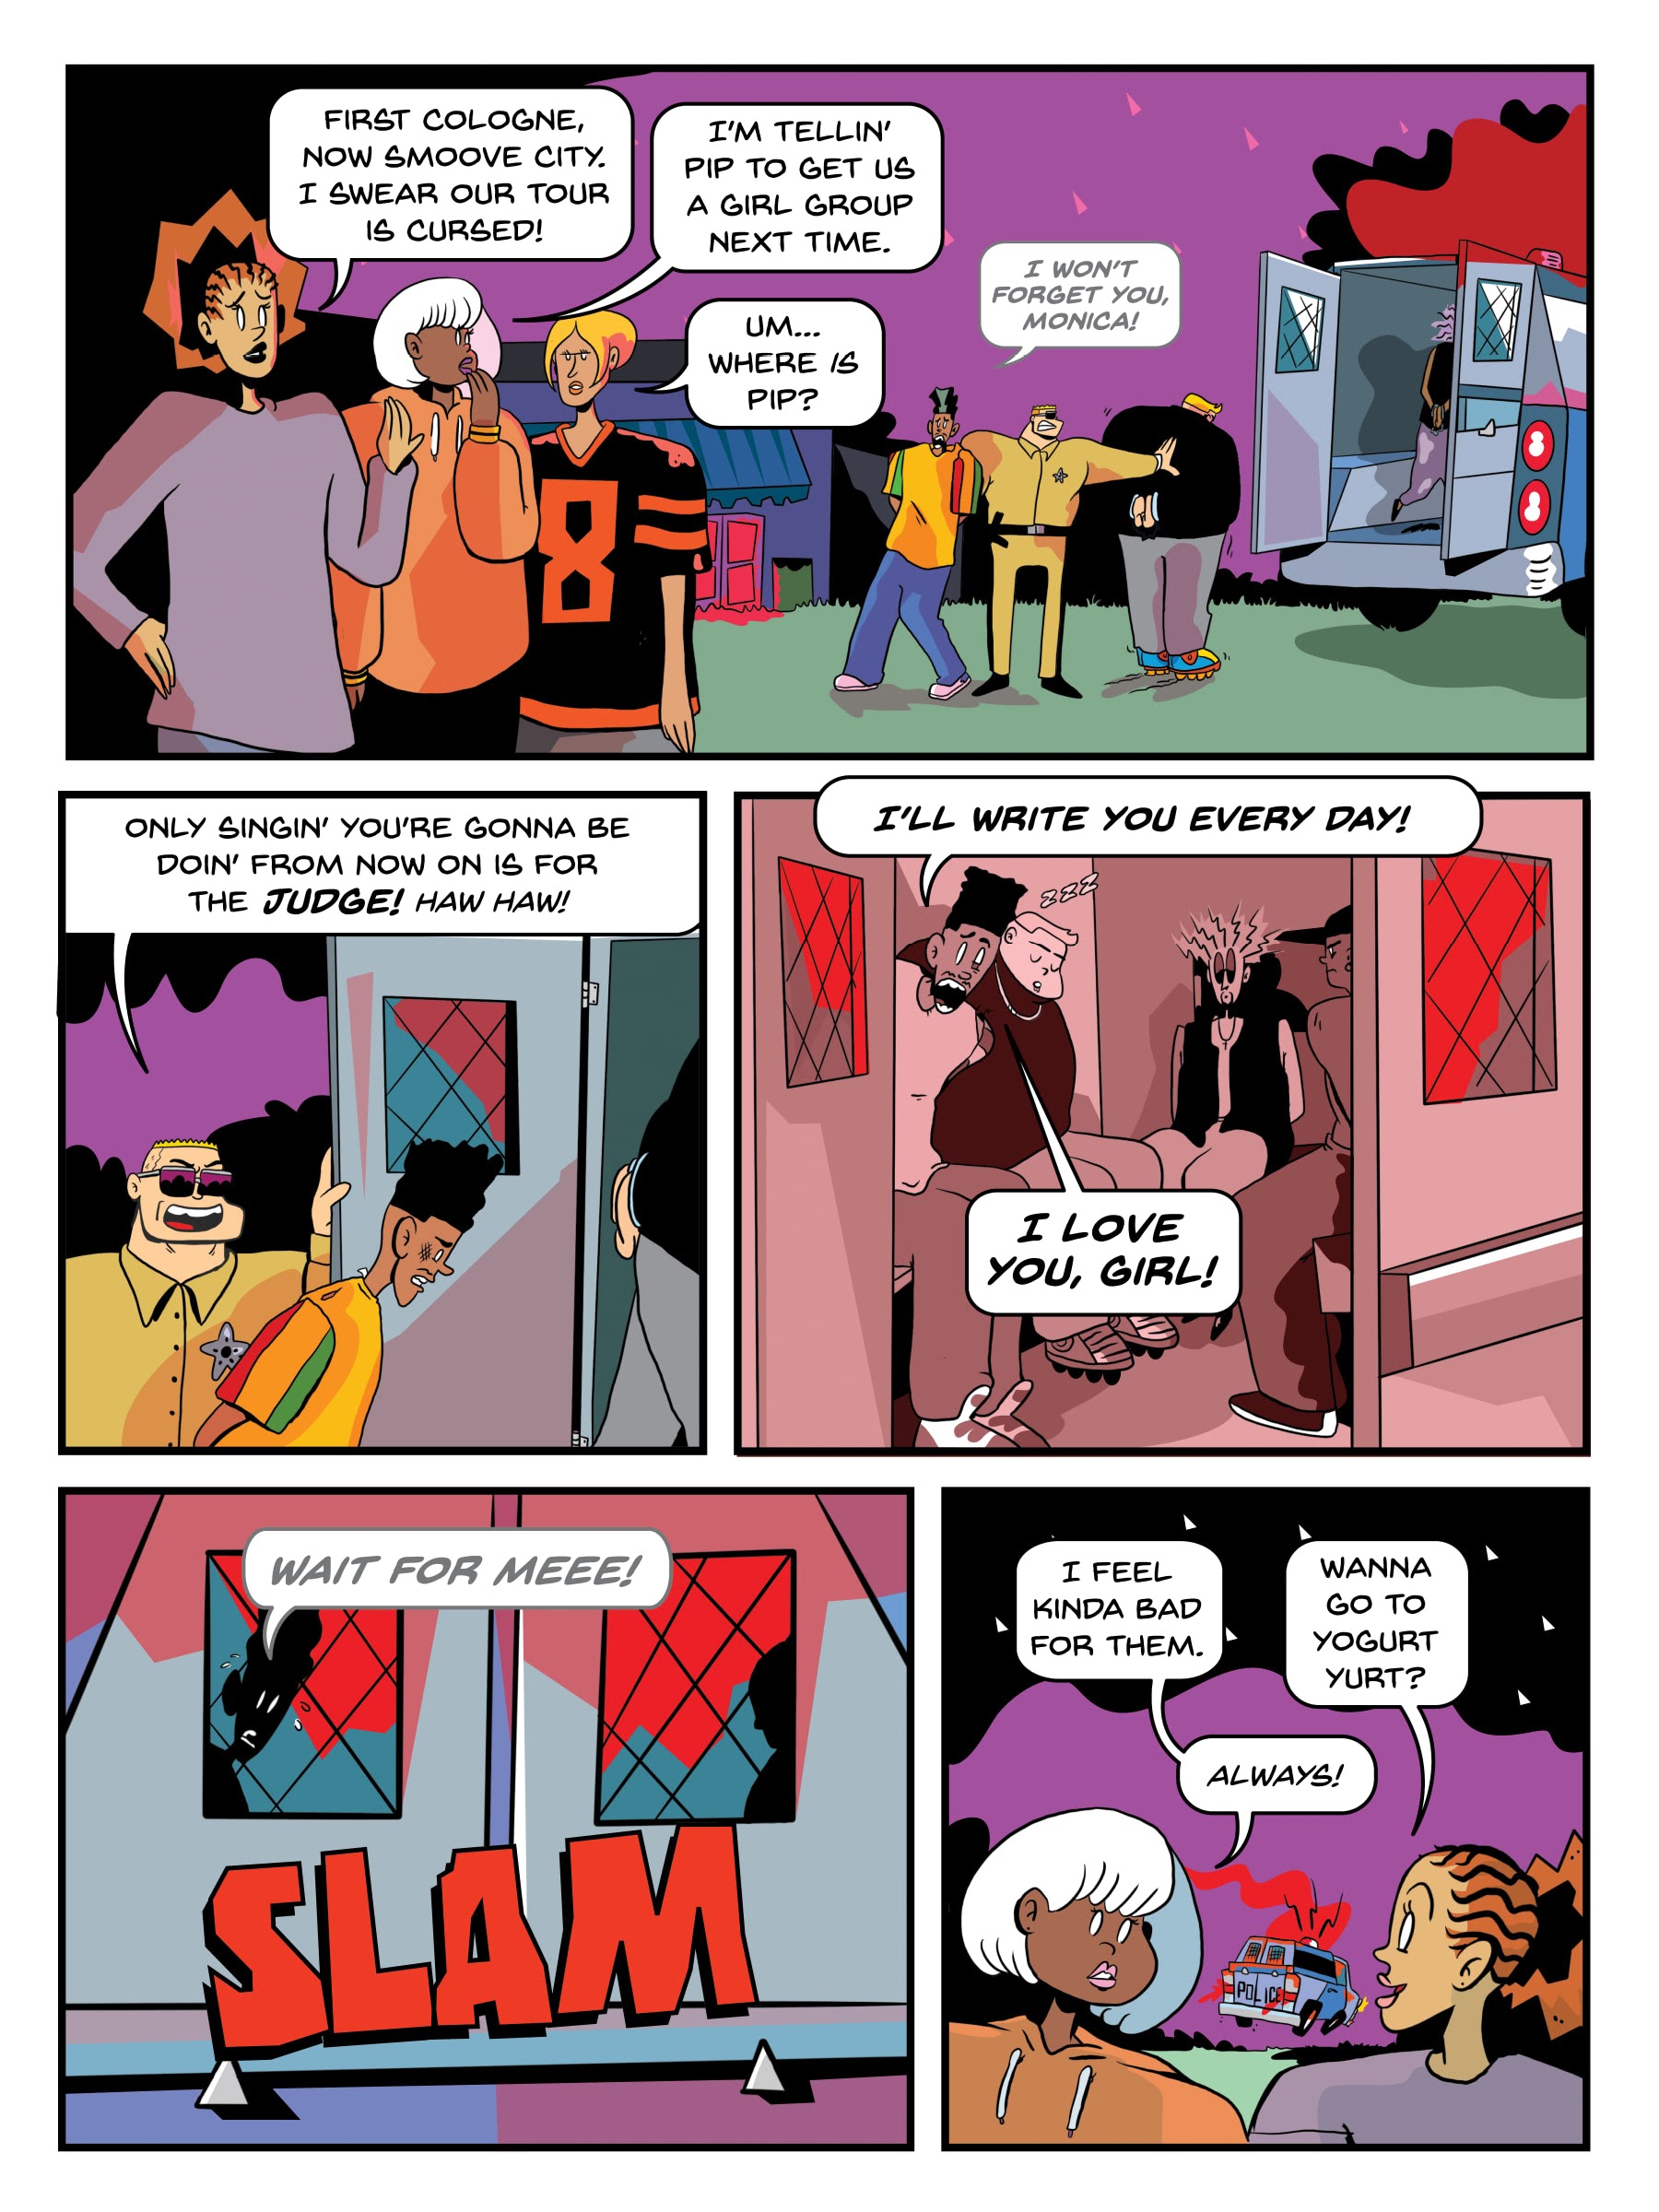 Read online Smoove City comic -  Issue # TPB (Part 1) - 92